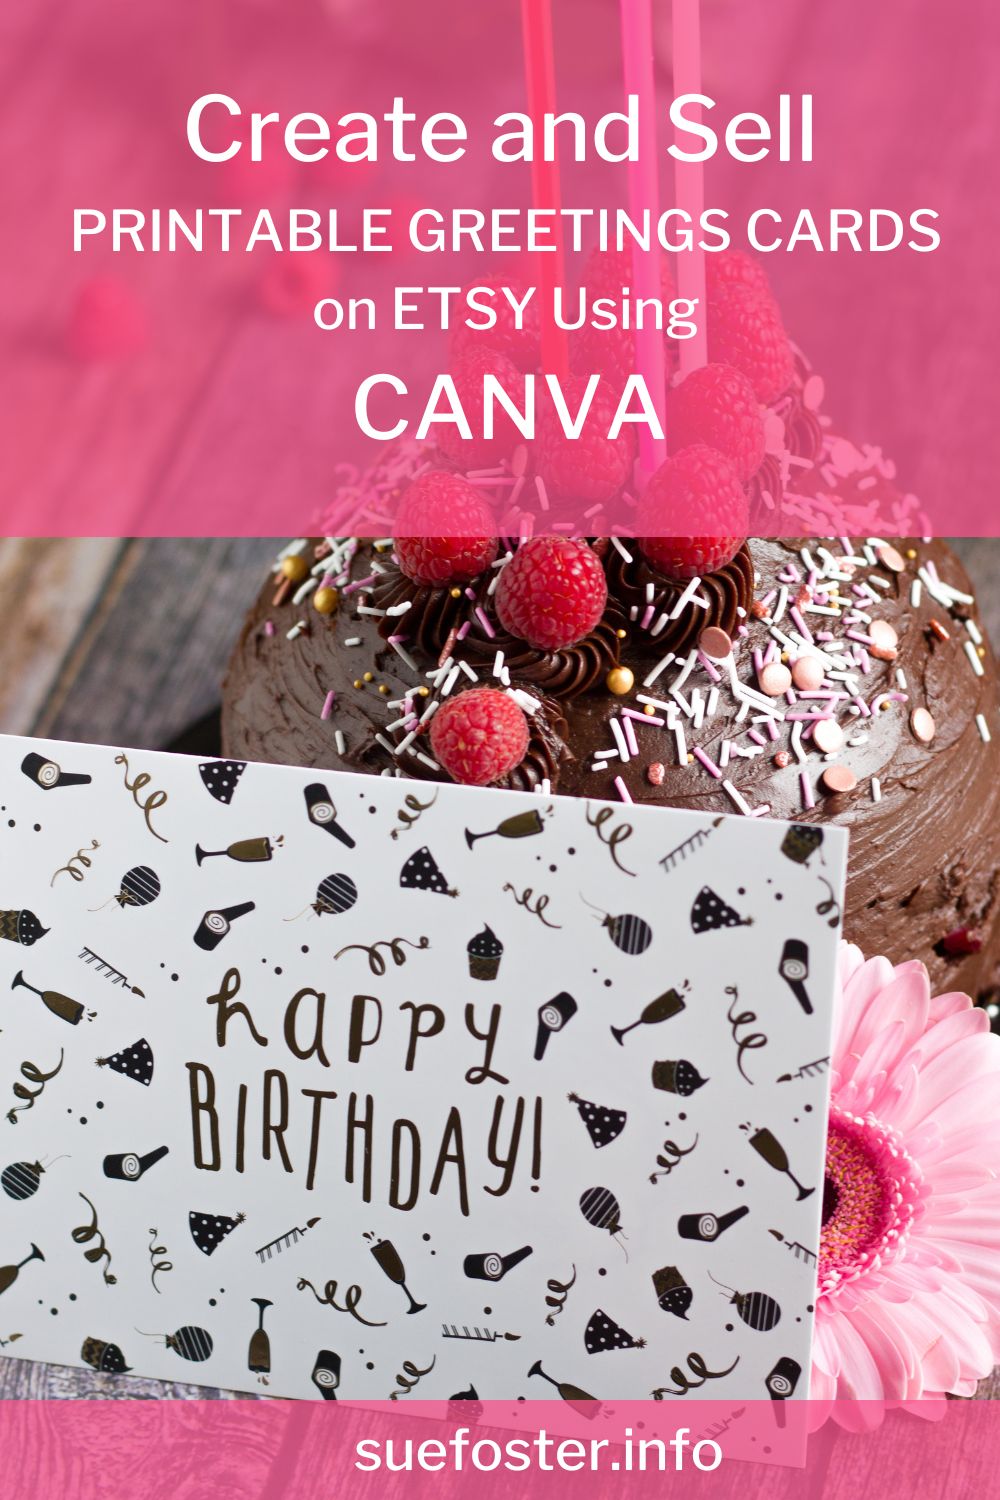 Earn Online Selling Printable Greeting Cards: Step-by-Step Guide for Etsy. No shipping, all digital. Create, list, and profit!